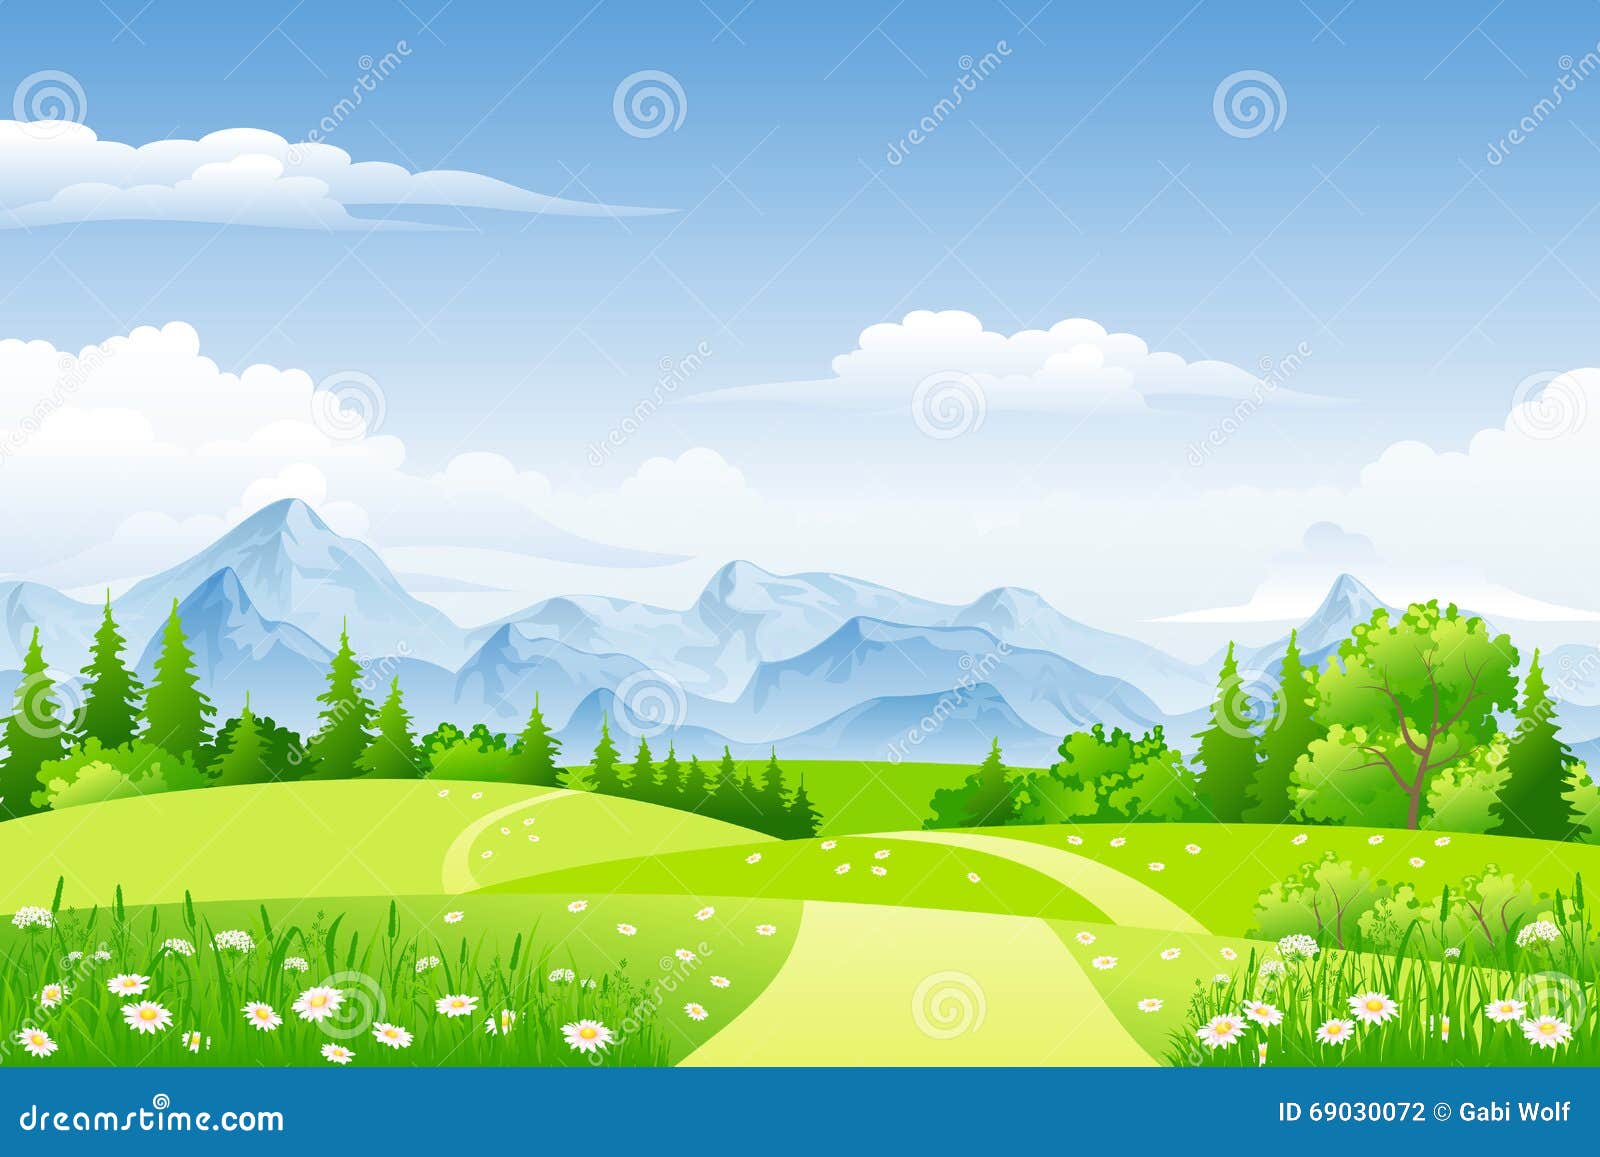 summer landscape with meadows